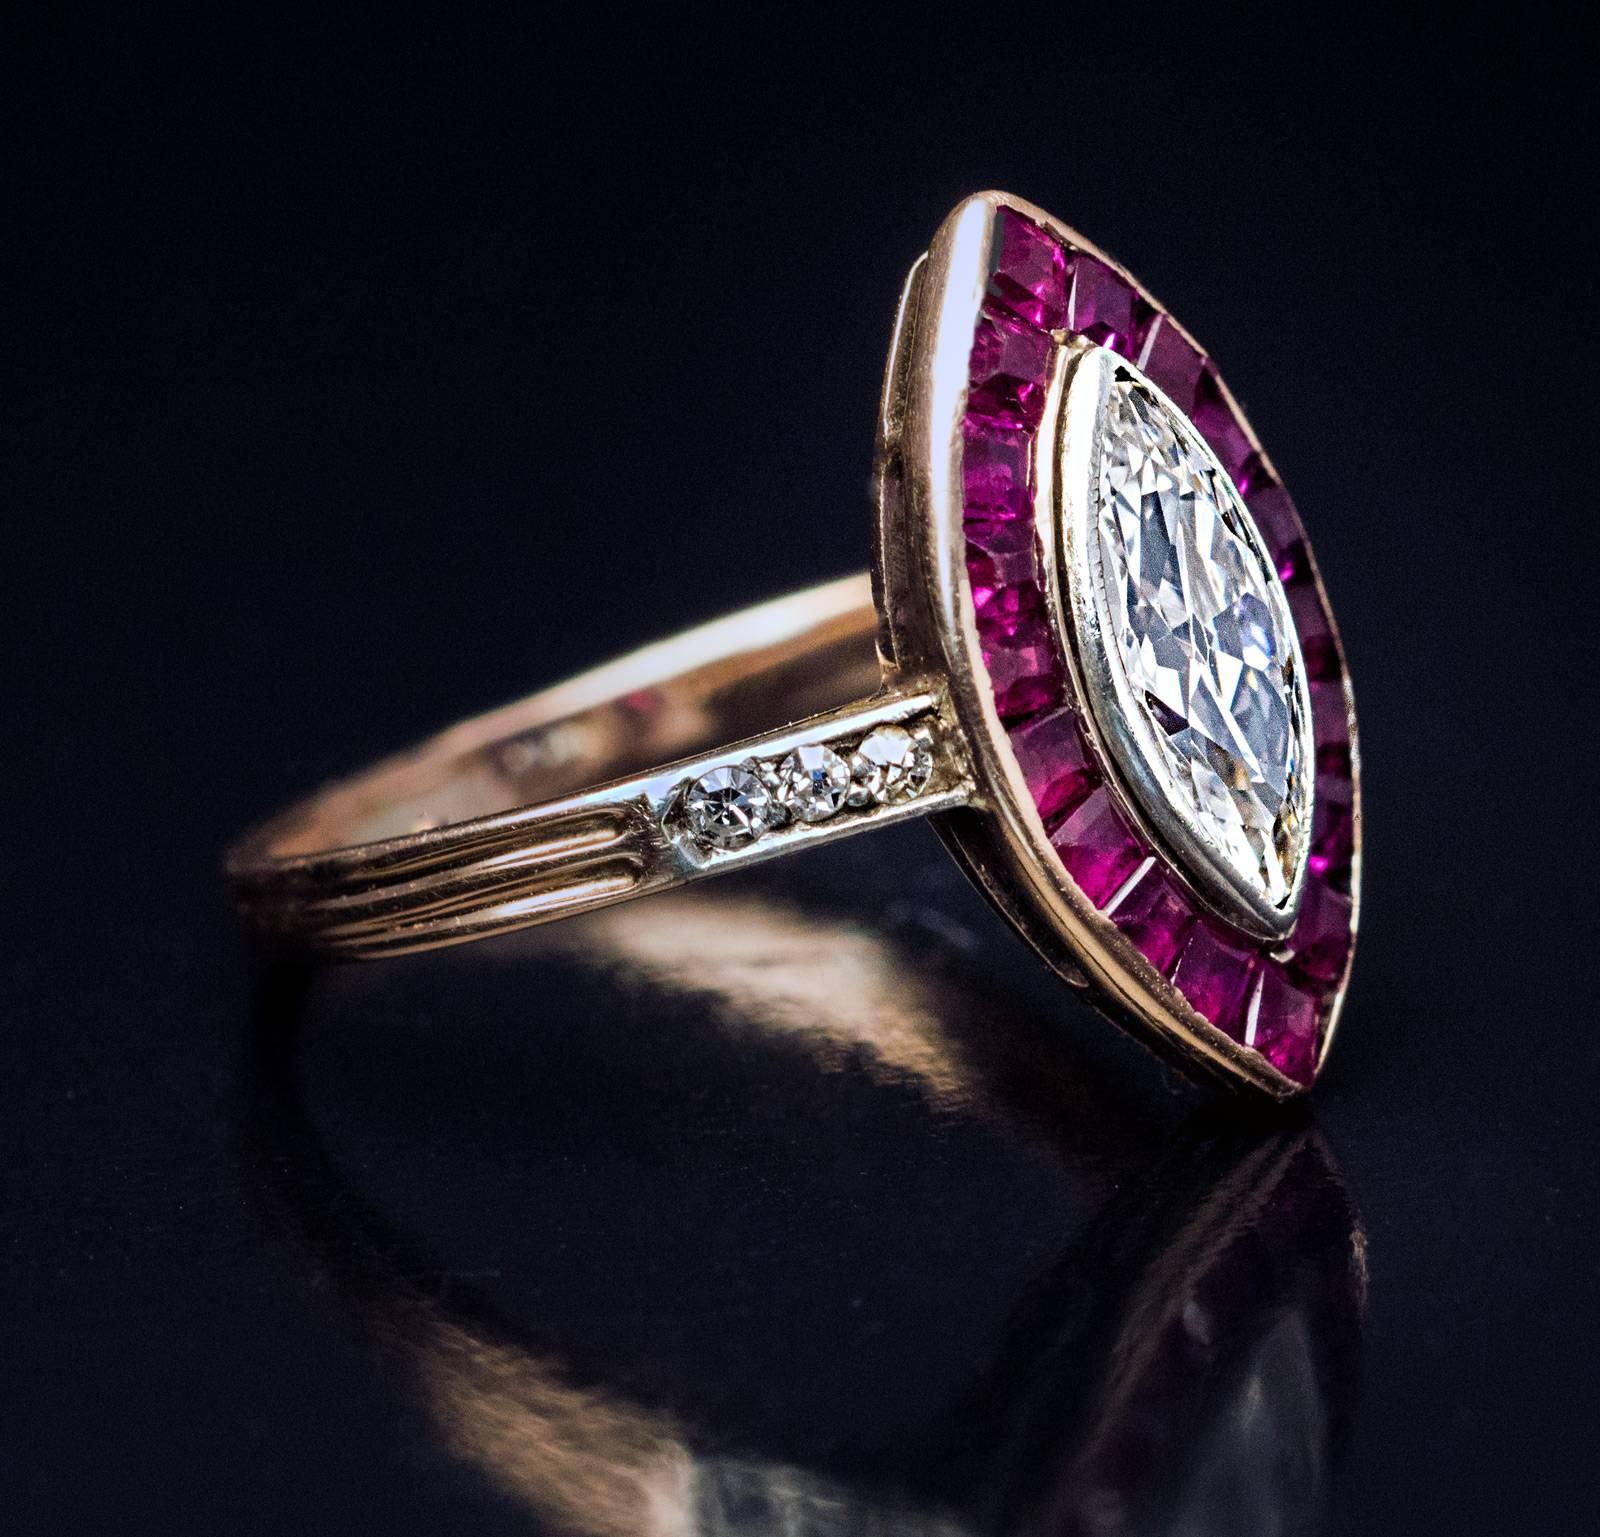 An antique Edwardian era navette shape engagement ring is centered with an old marquise cut diamond (9.6 x 4.3 x 2.5 mm, approximately 0.60 ct, H color, VS1 clarity) framed by channel set calibre cut rubies (estimated total ruby weight 0.80 ct). The